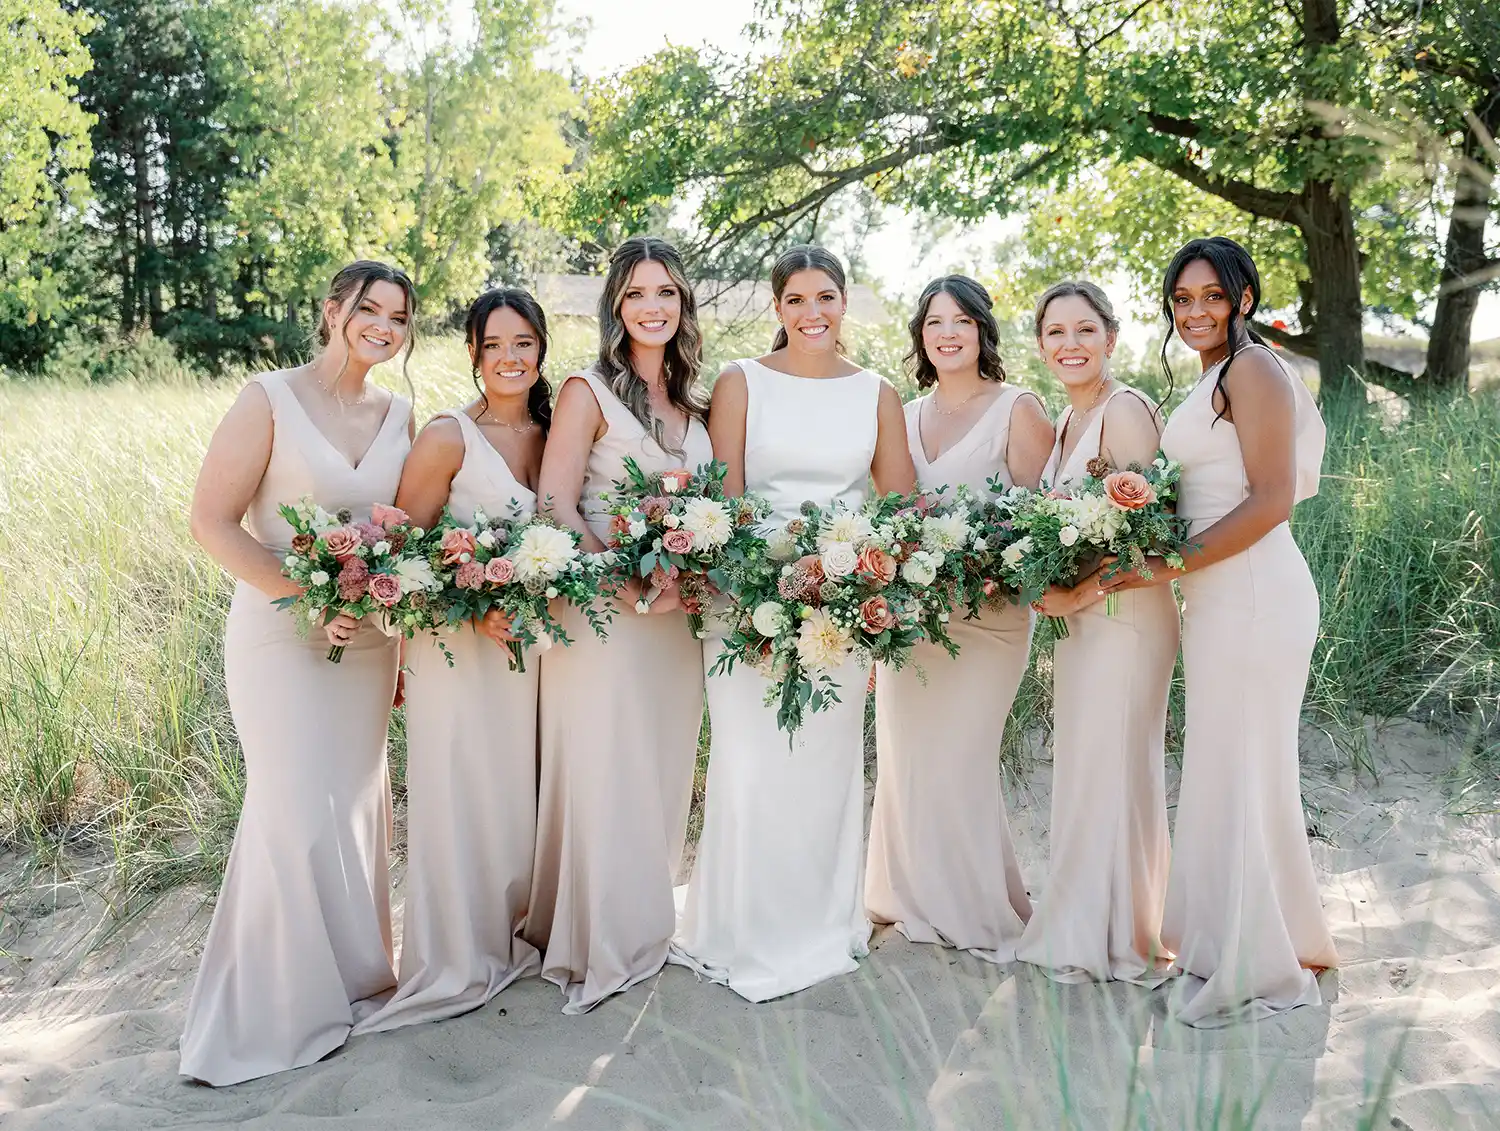 Gabrielle posing with her bridesmaids